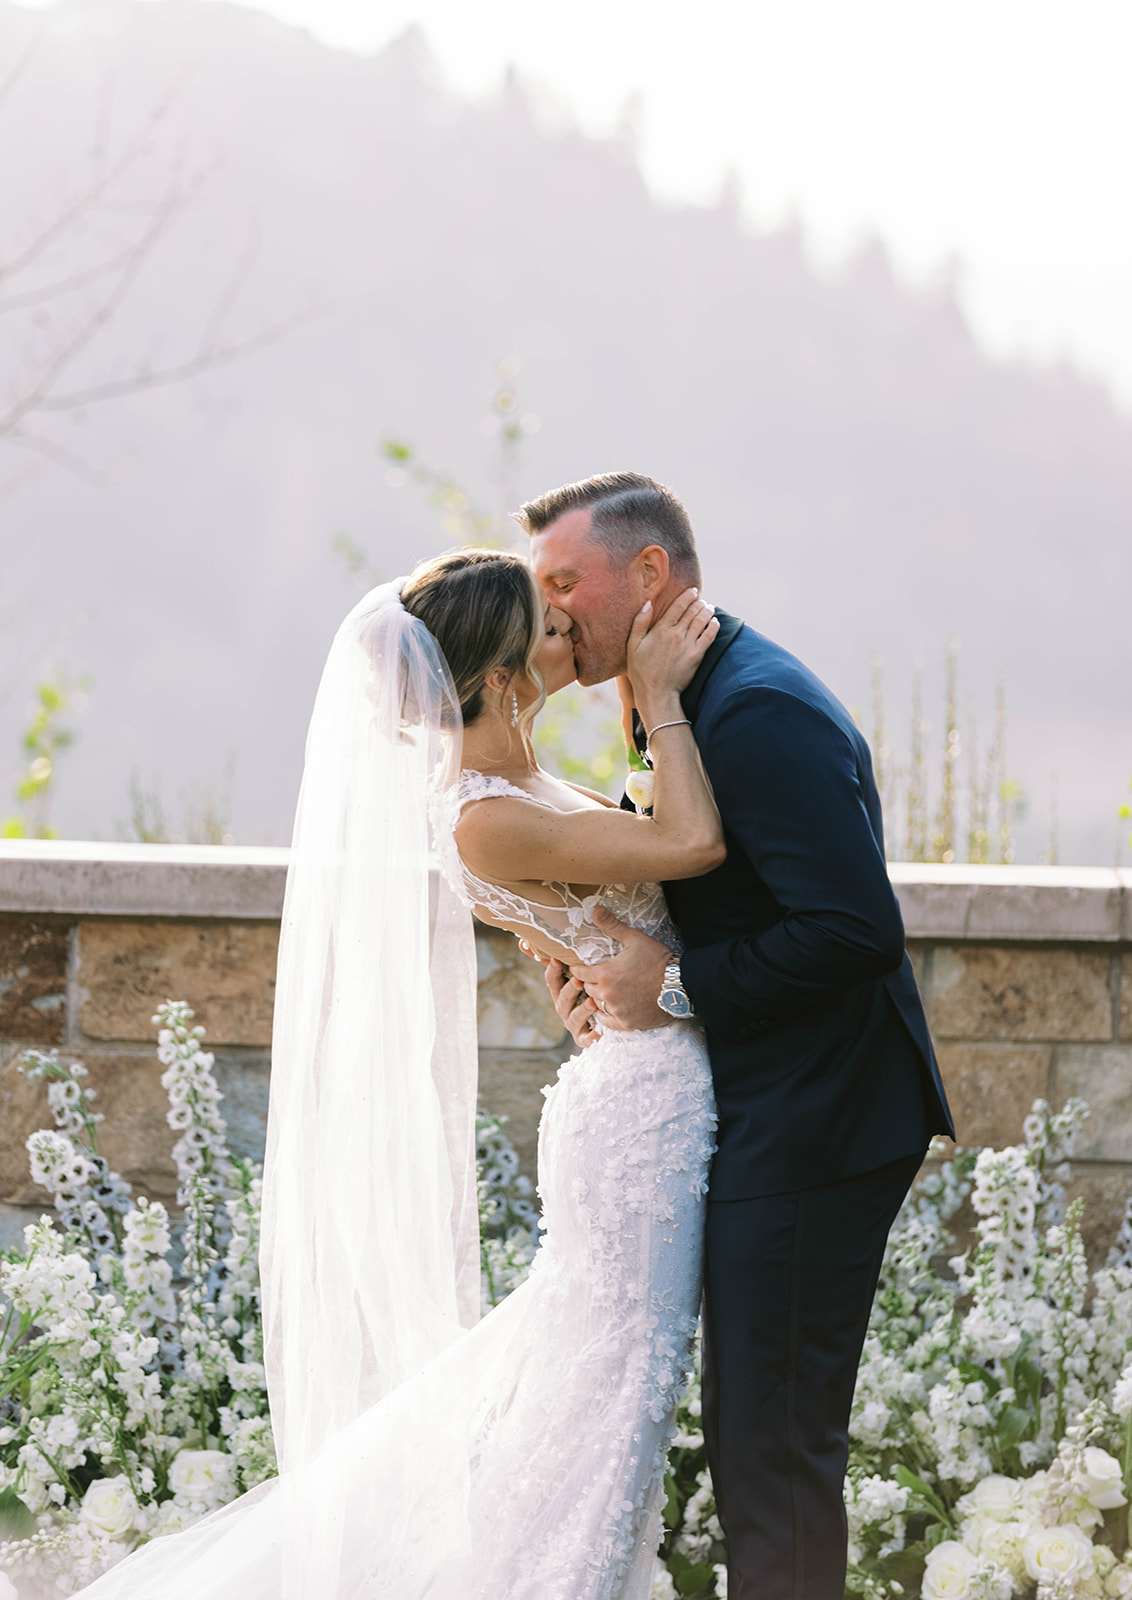 a couple kiss surrounded by white wedding flowers at their st regis deer valley wedding ceremony